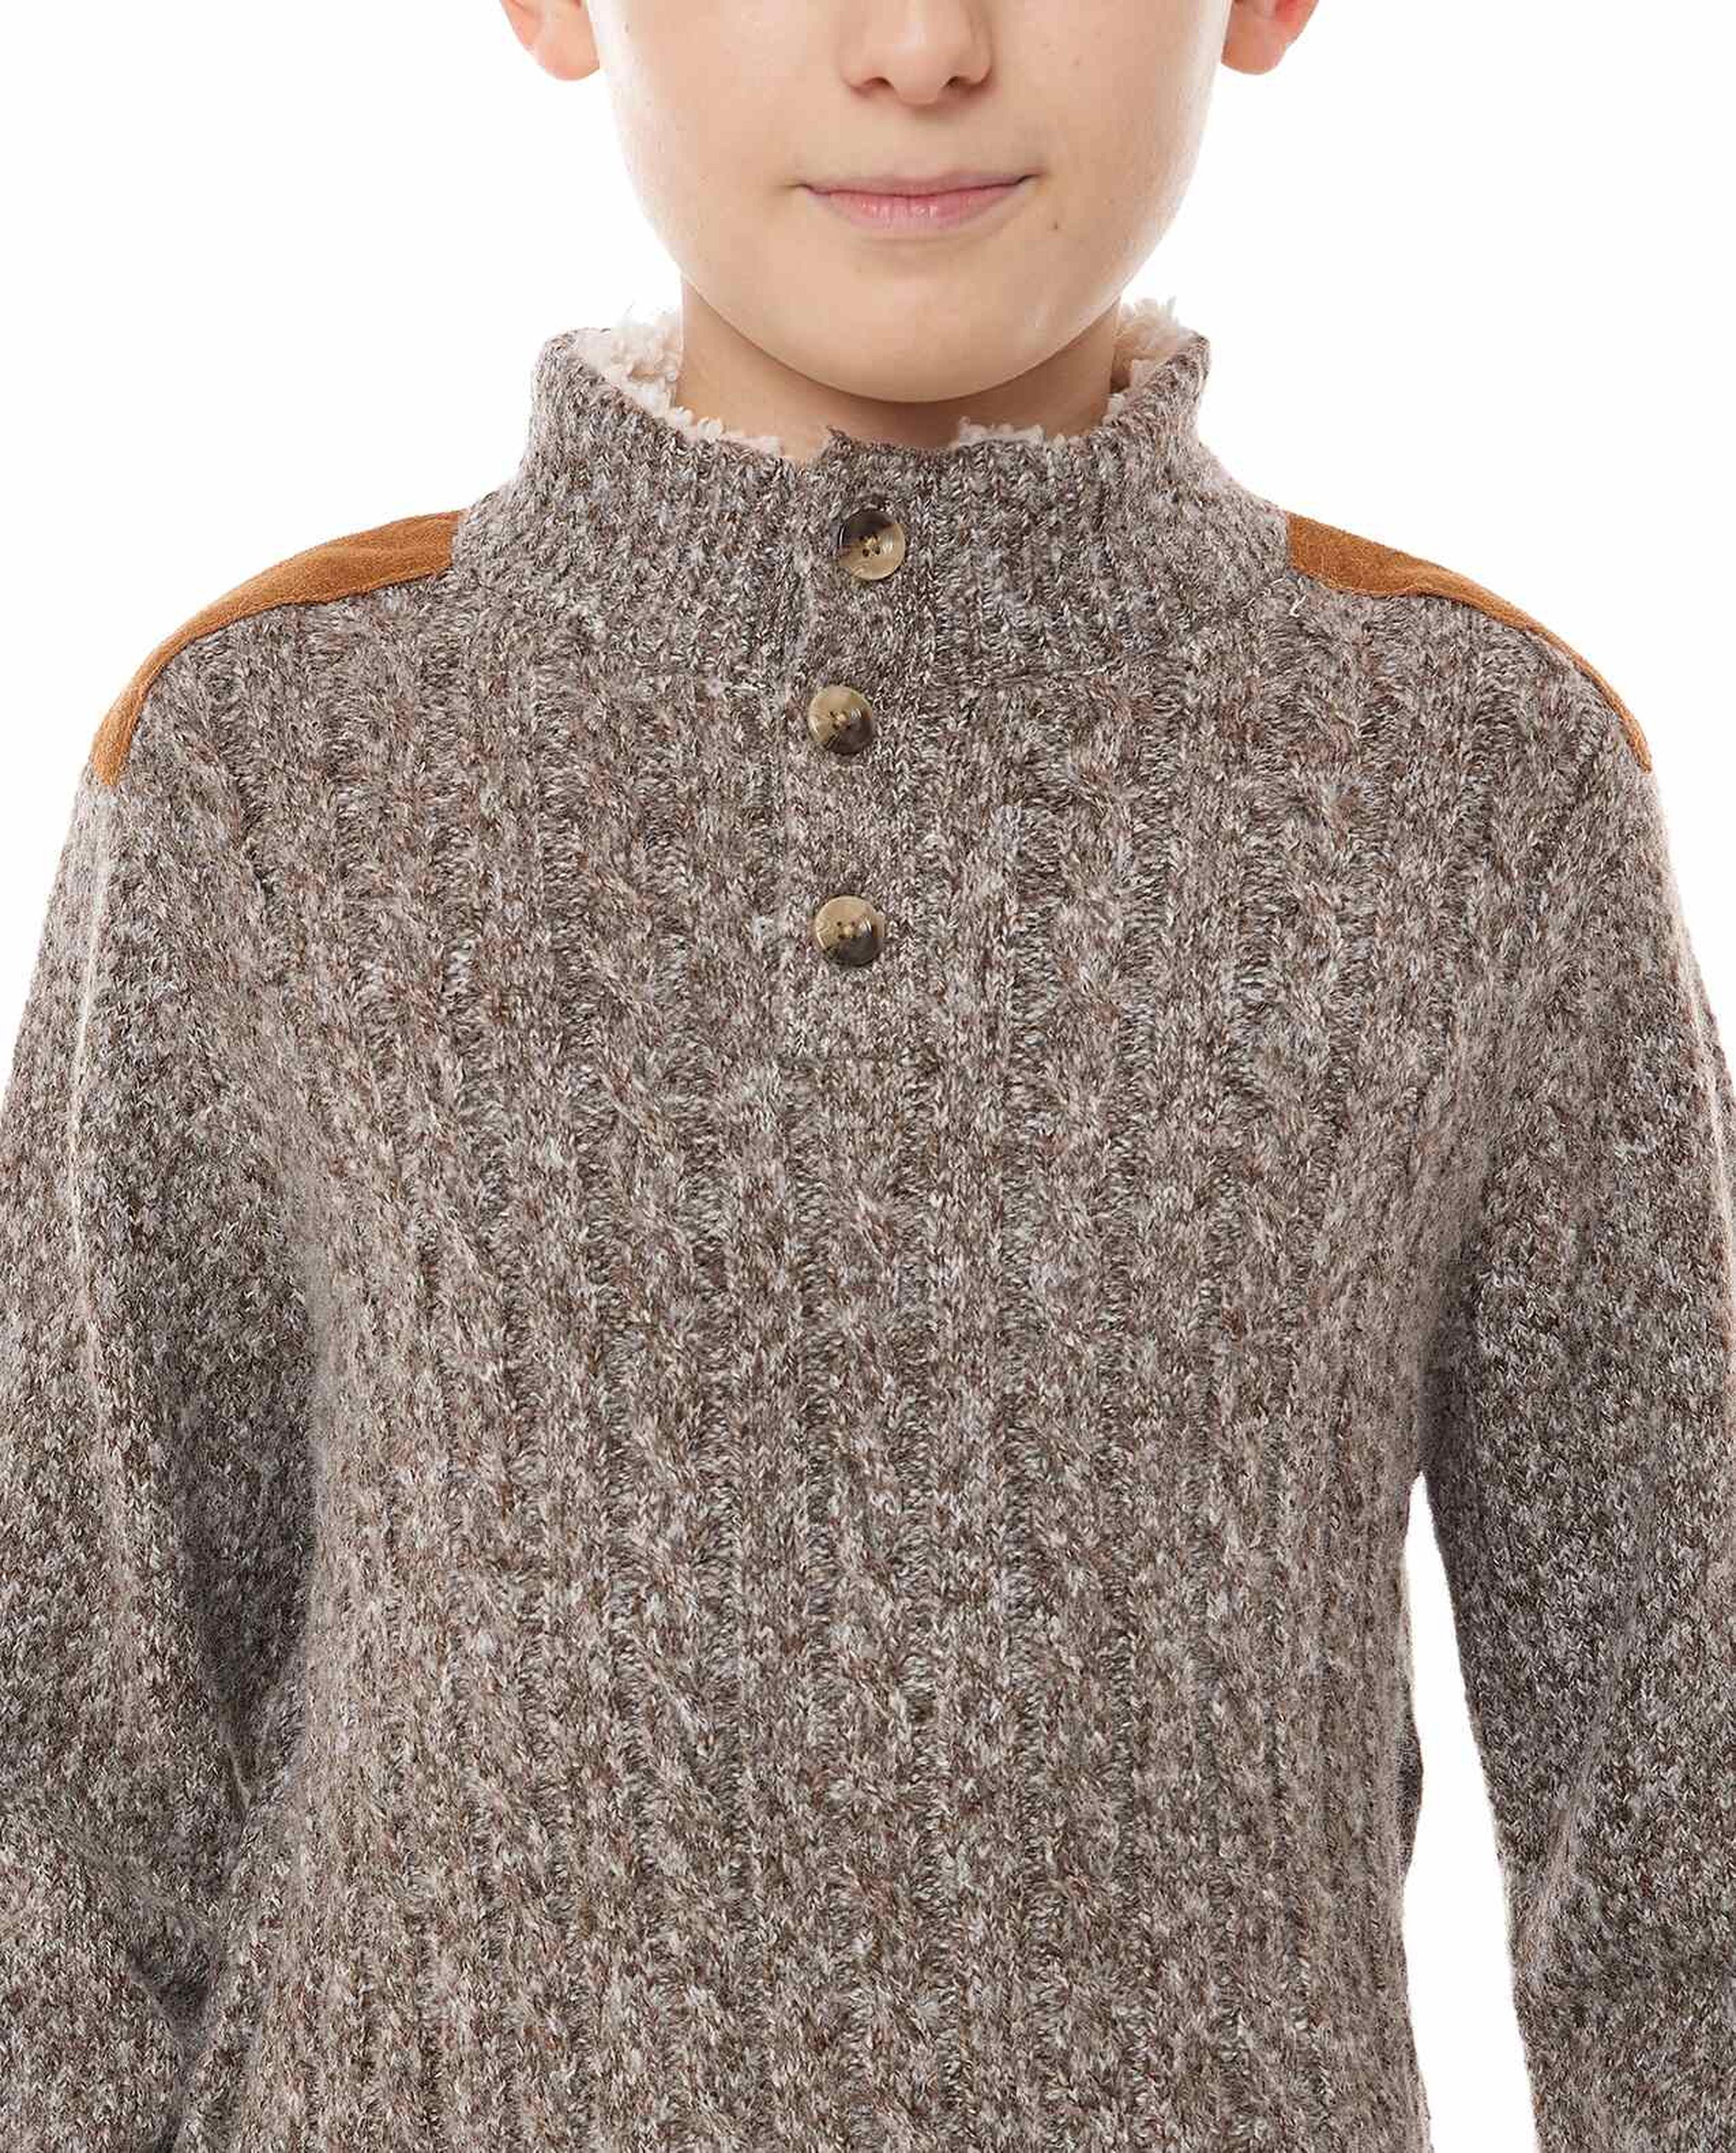 Knitted Sweater with High Neck and Long Sleeves